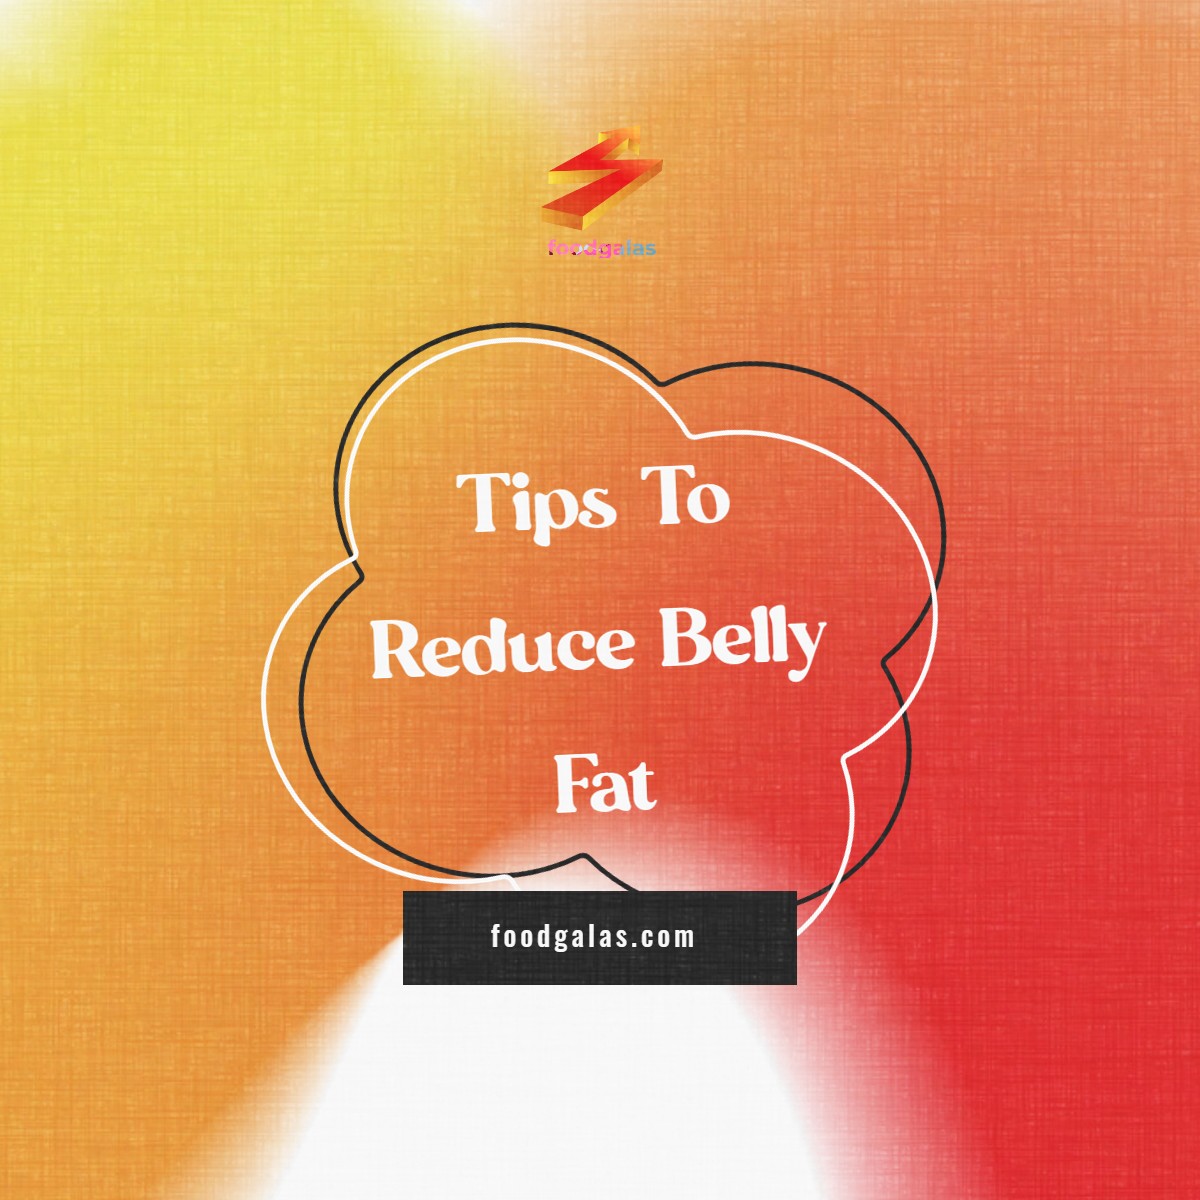 Tips to Reduce Belly Fat